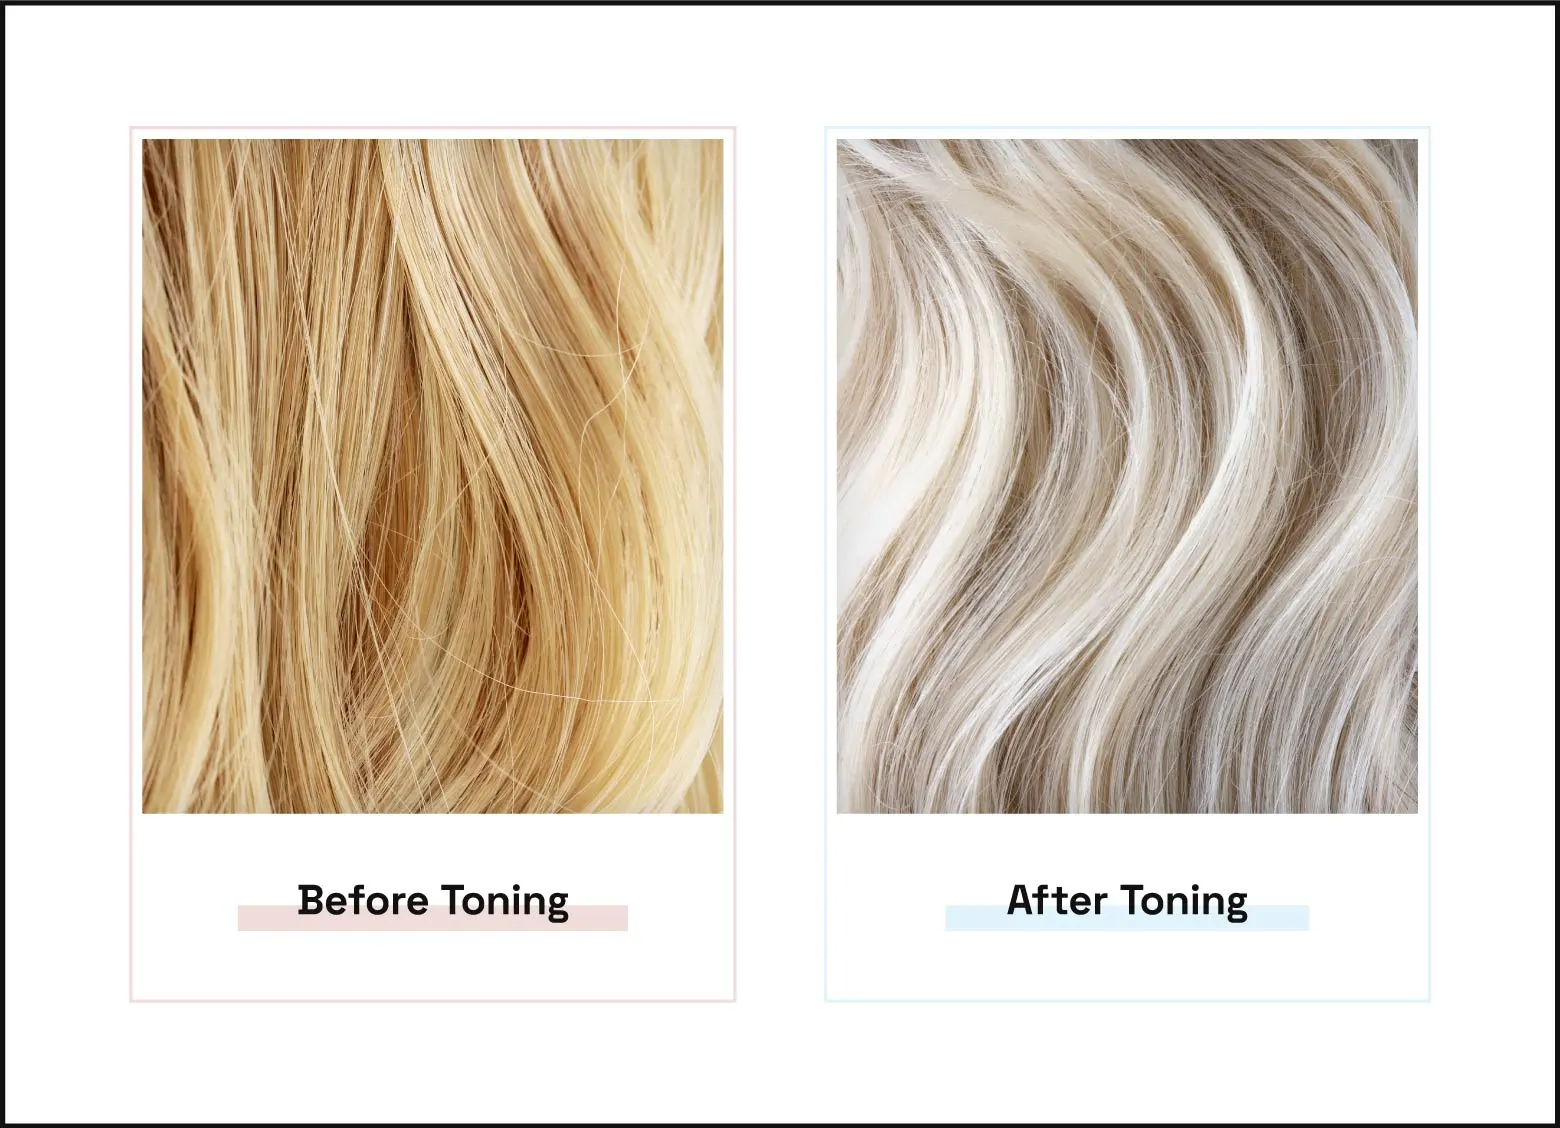 Before and after images comparing results of hair toner.